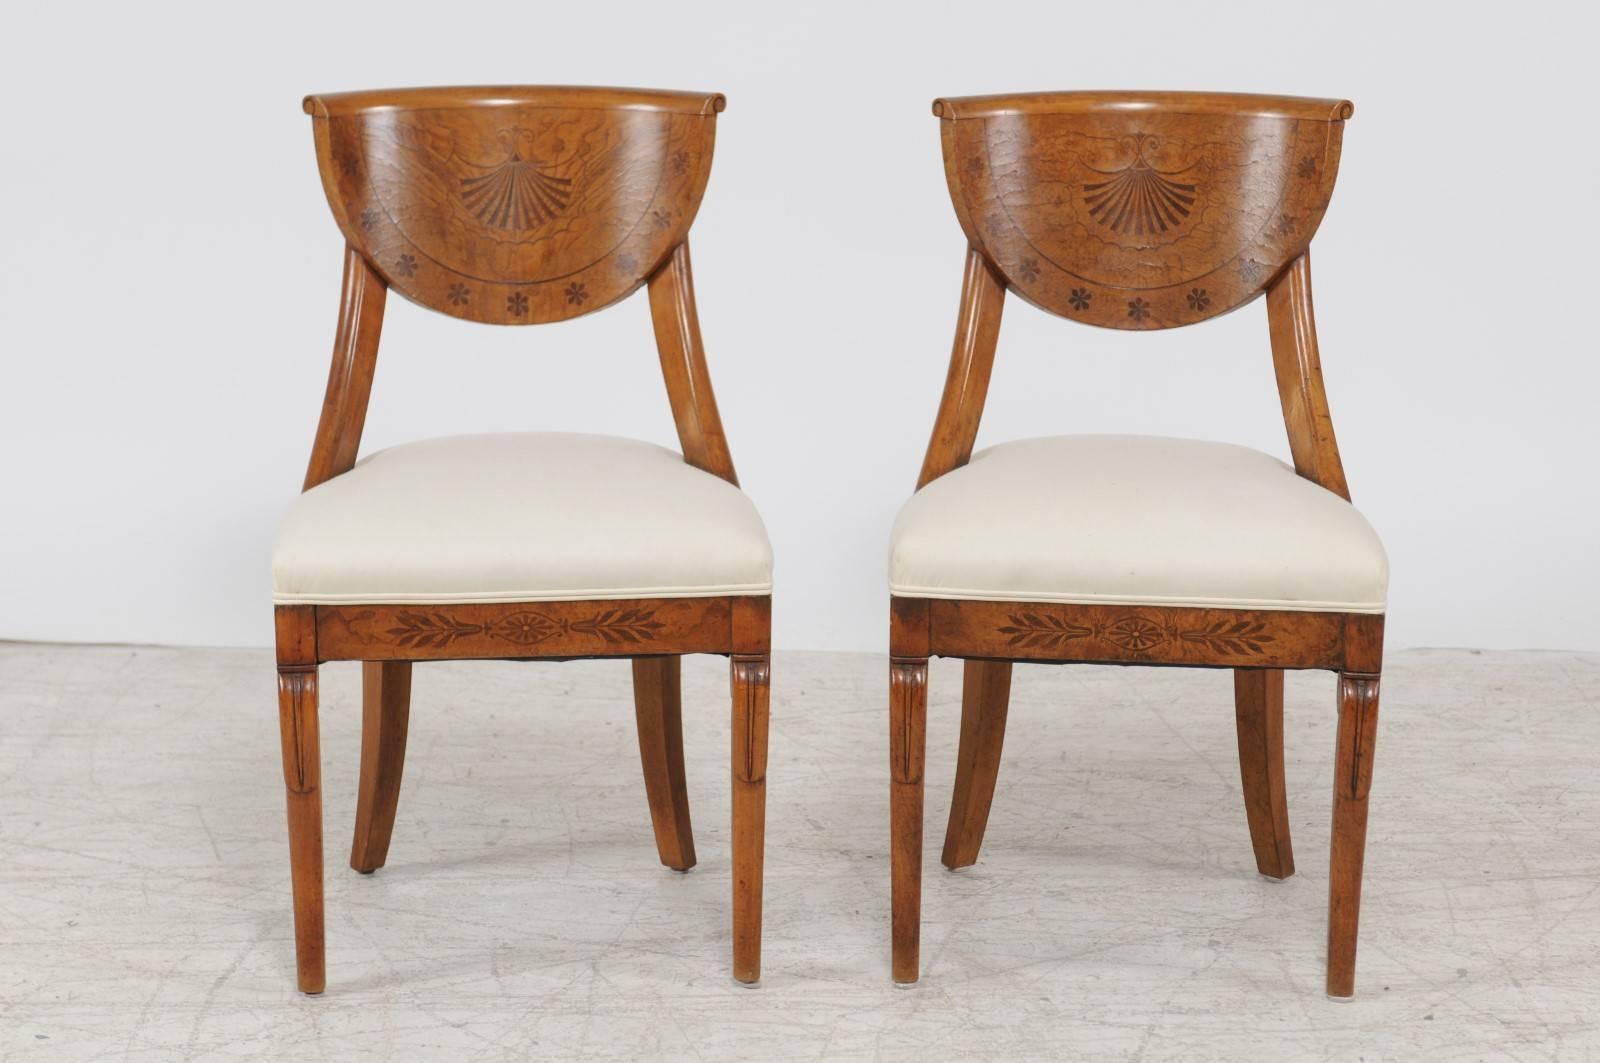 Pair of 1840s Austrian Biedermeier Upholstered Side Chairs with Marquetry Décor 3